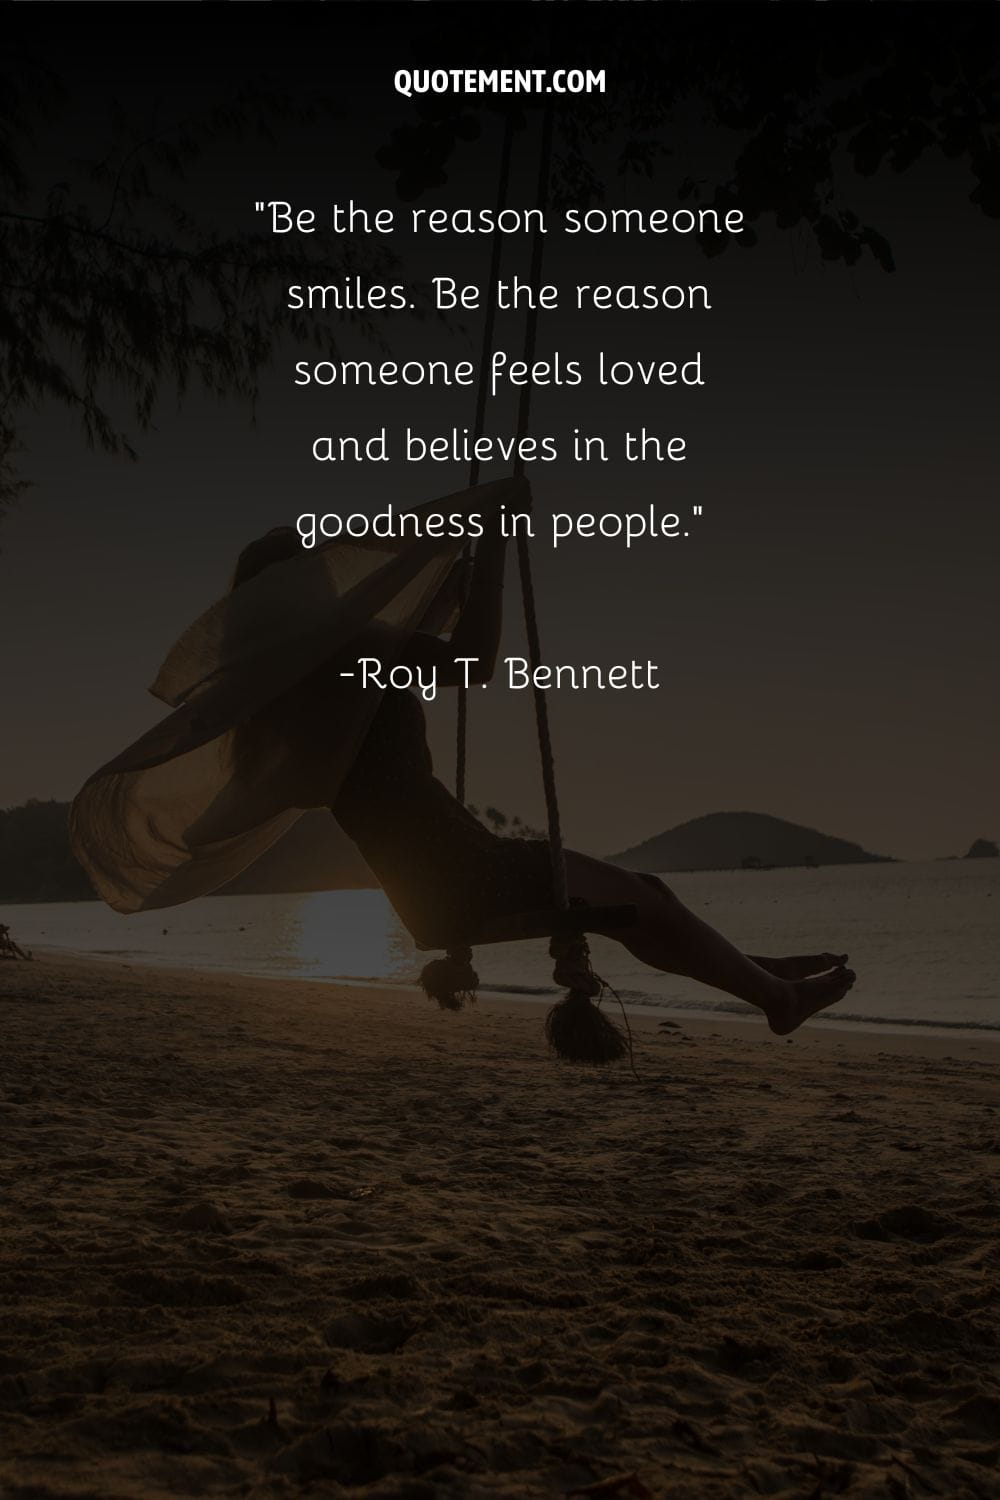 Be the reason someone smiles. Be the reason someone feels loved and believes in the goodness in people